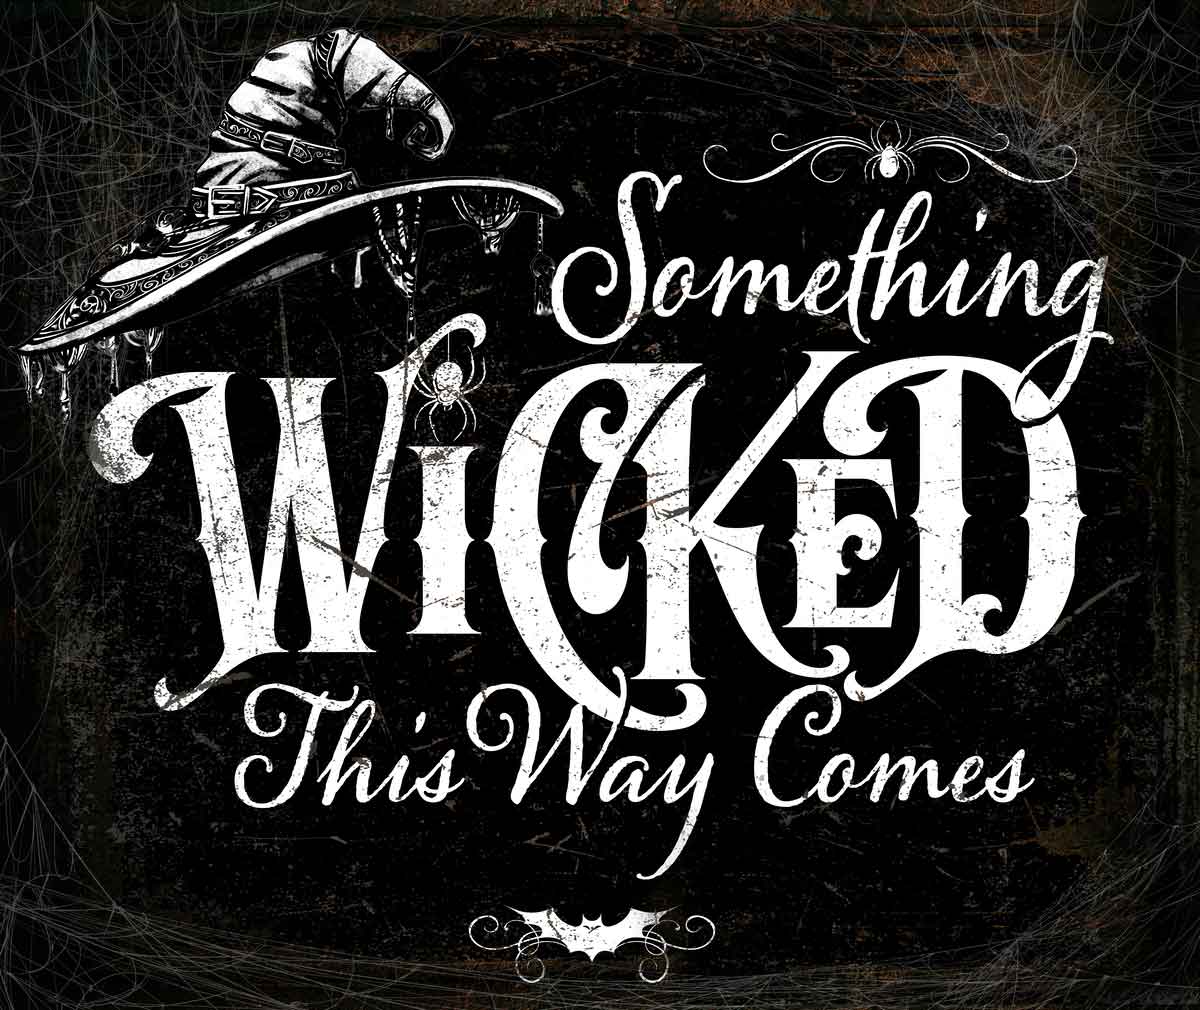 Halloween Wall Sign on Black Rustic Background with the Words Something Wicked This way Comes with spider webs